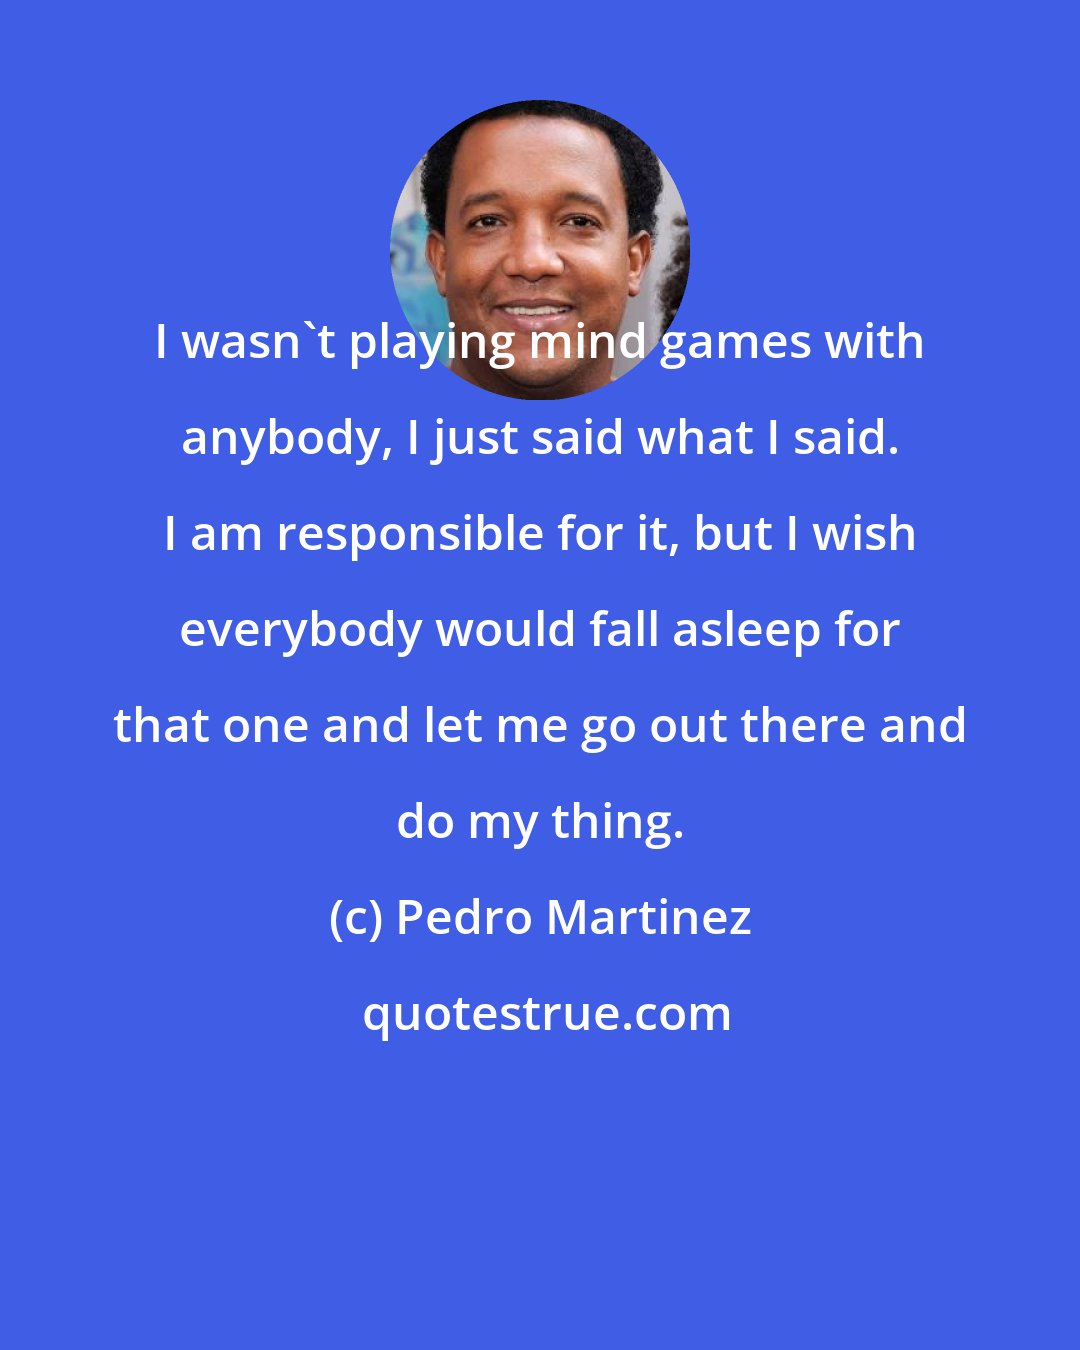 Pedro Martinez: I wasn't playing mind games with anybody, I just said what I said. I am responsible for it, but I wish everybody would fall asleep for that one and let me go out there and do my thing.